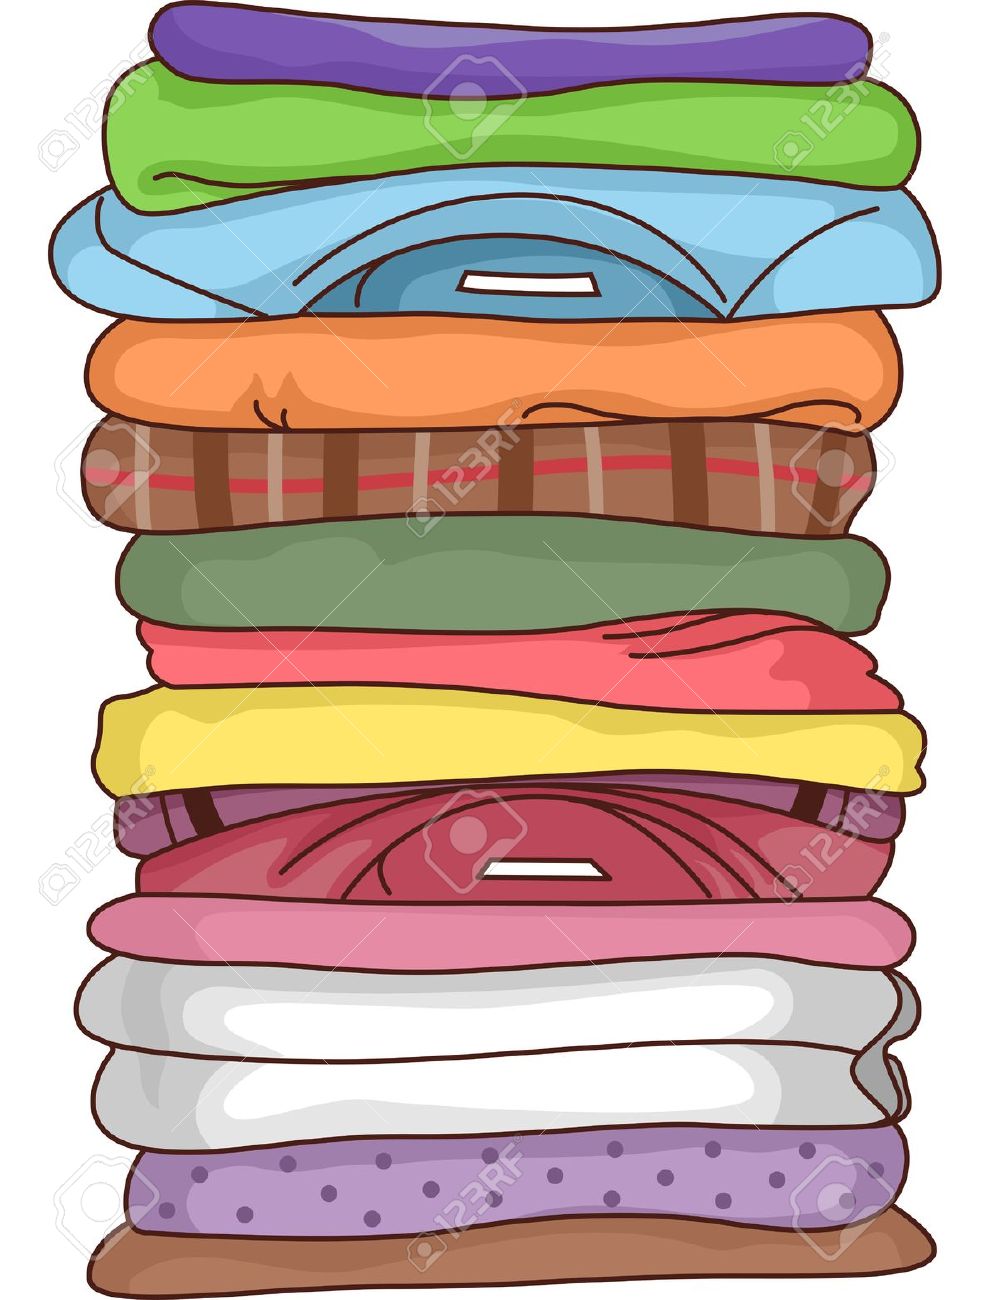 Free stack of clothing clipart